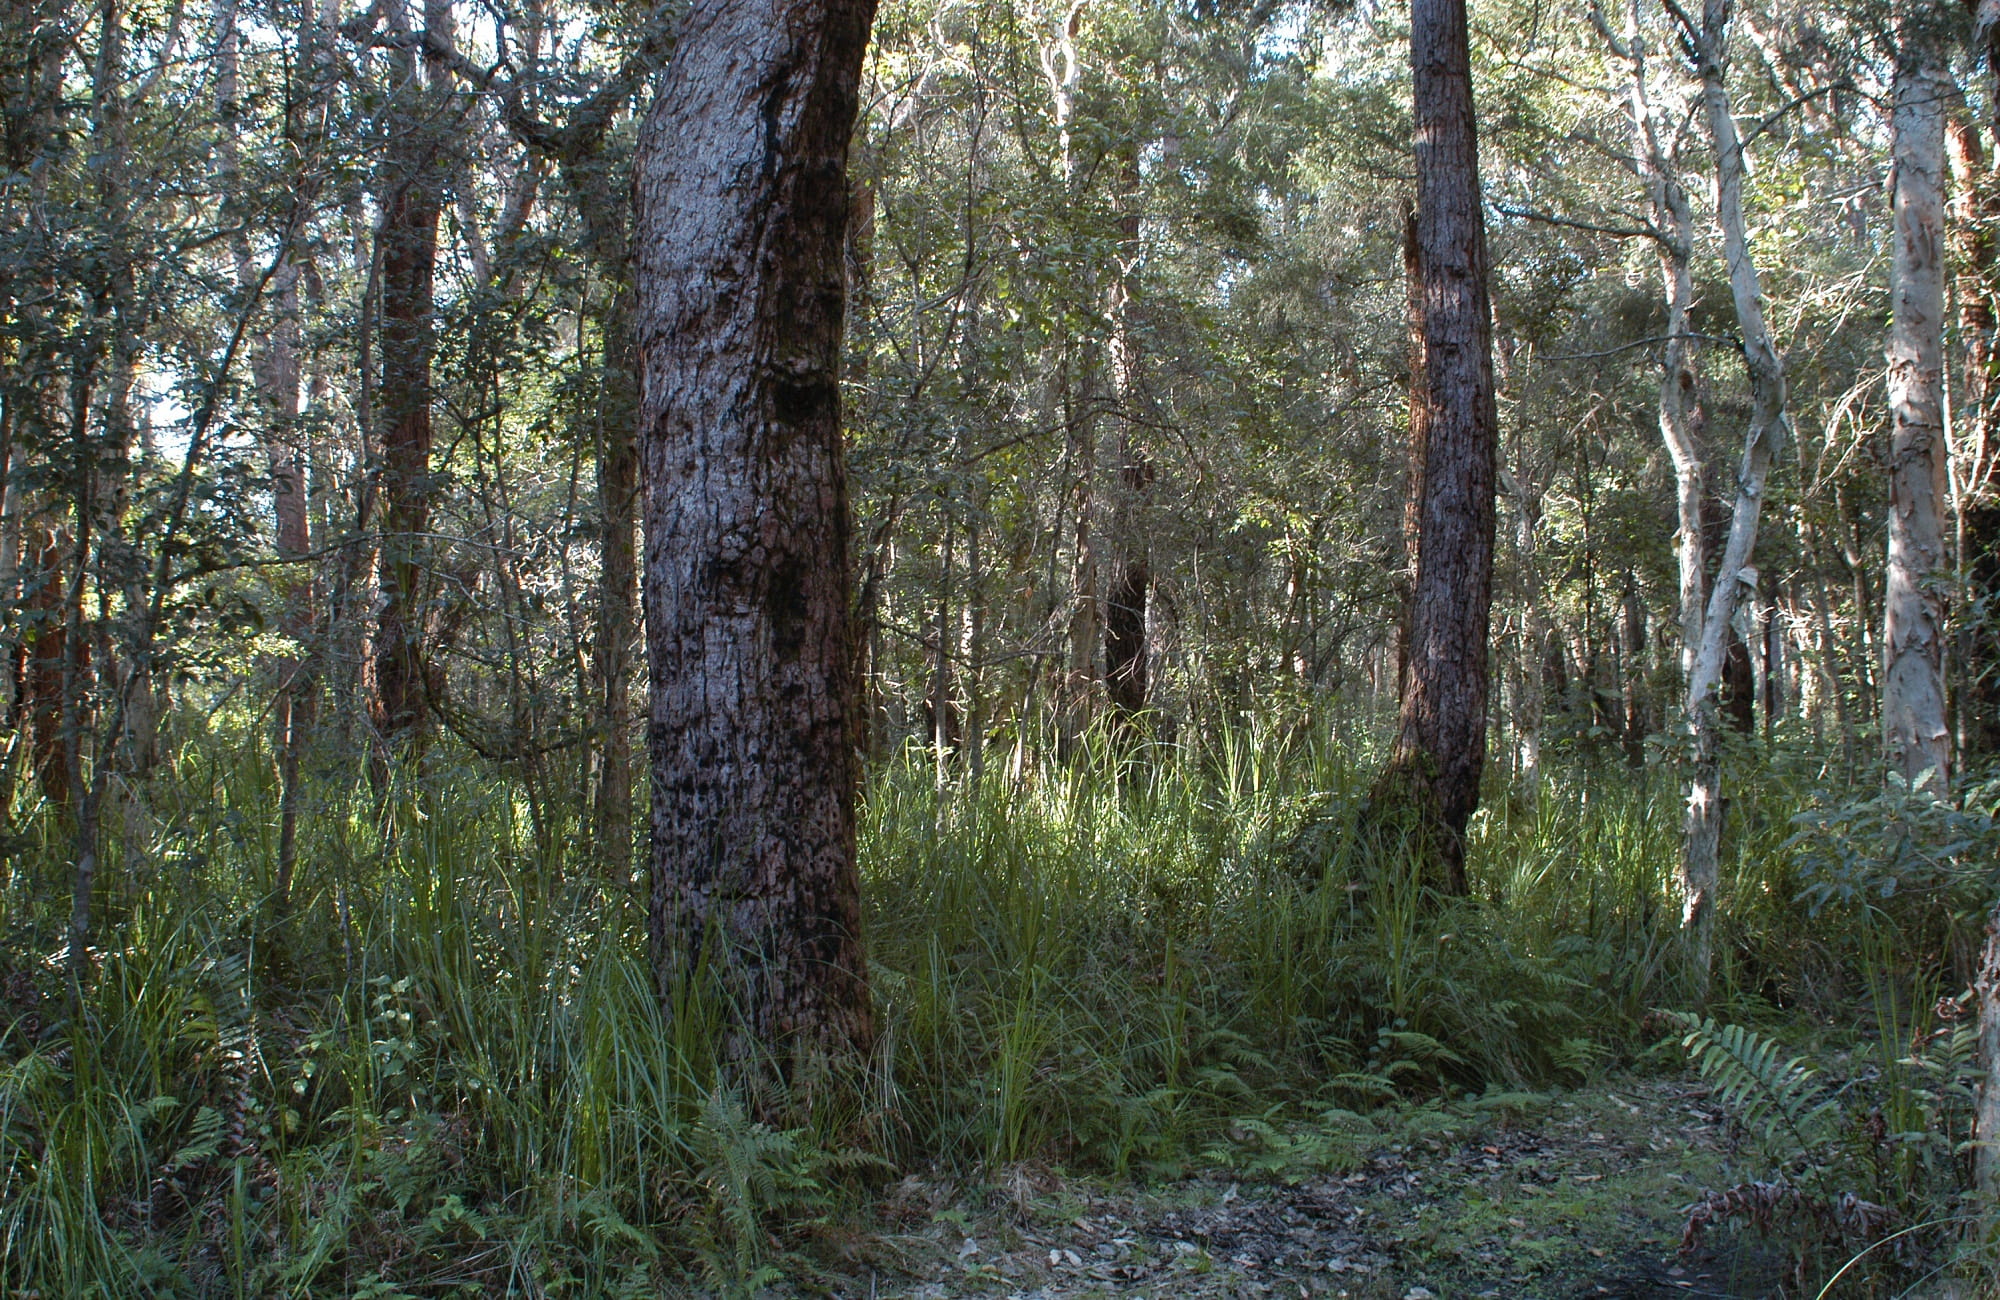 Swamp mahogany forest, Cockle Bay Nature Reserve. Photo: Doug Beckers